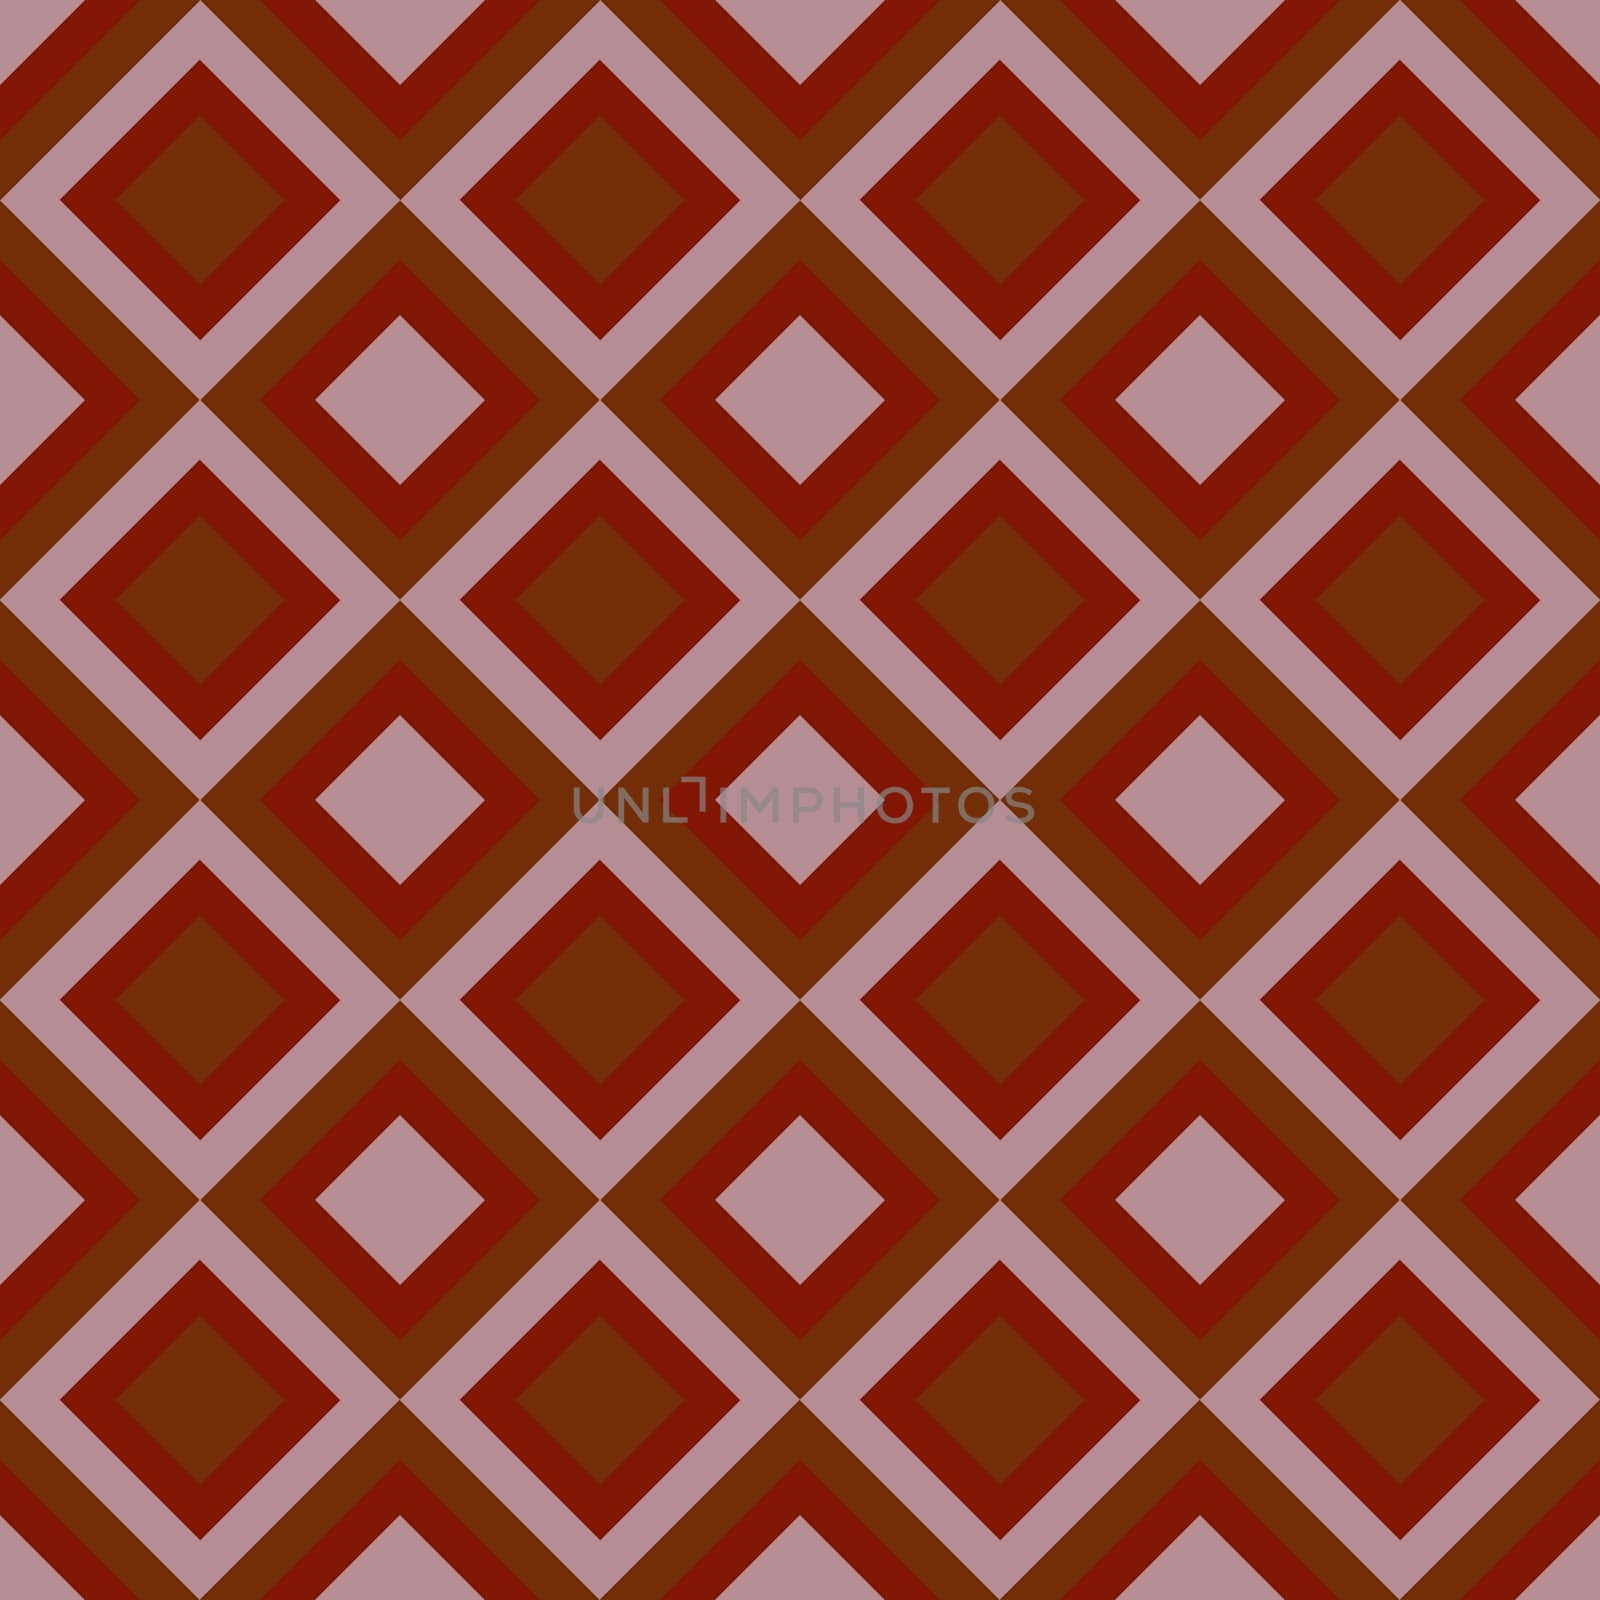 Seamless Groovy aestethic pattern with triangles in the style of the 70s and 60